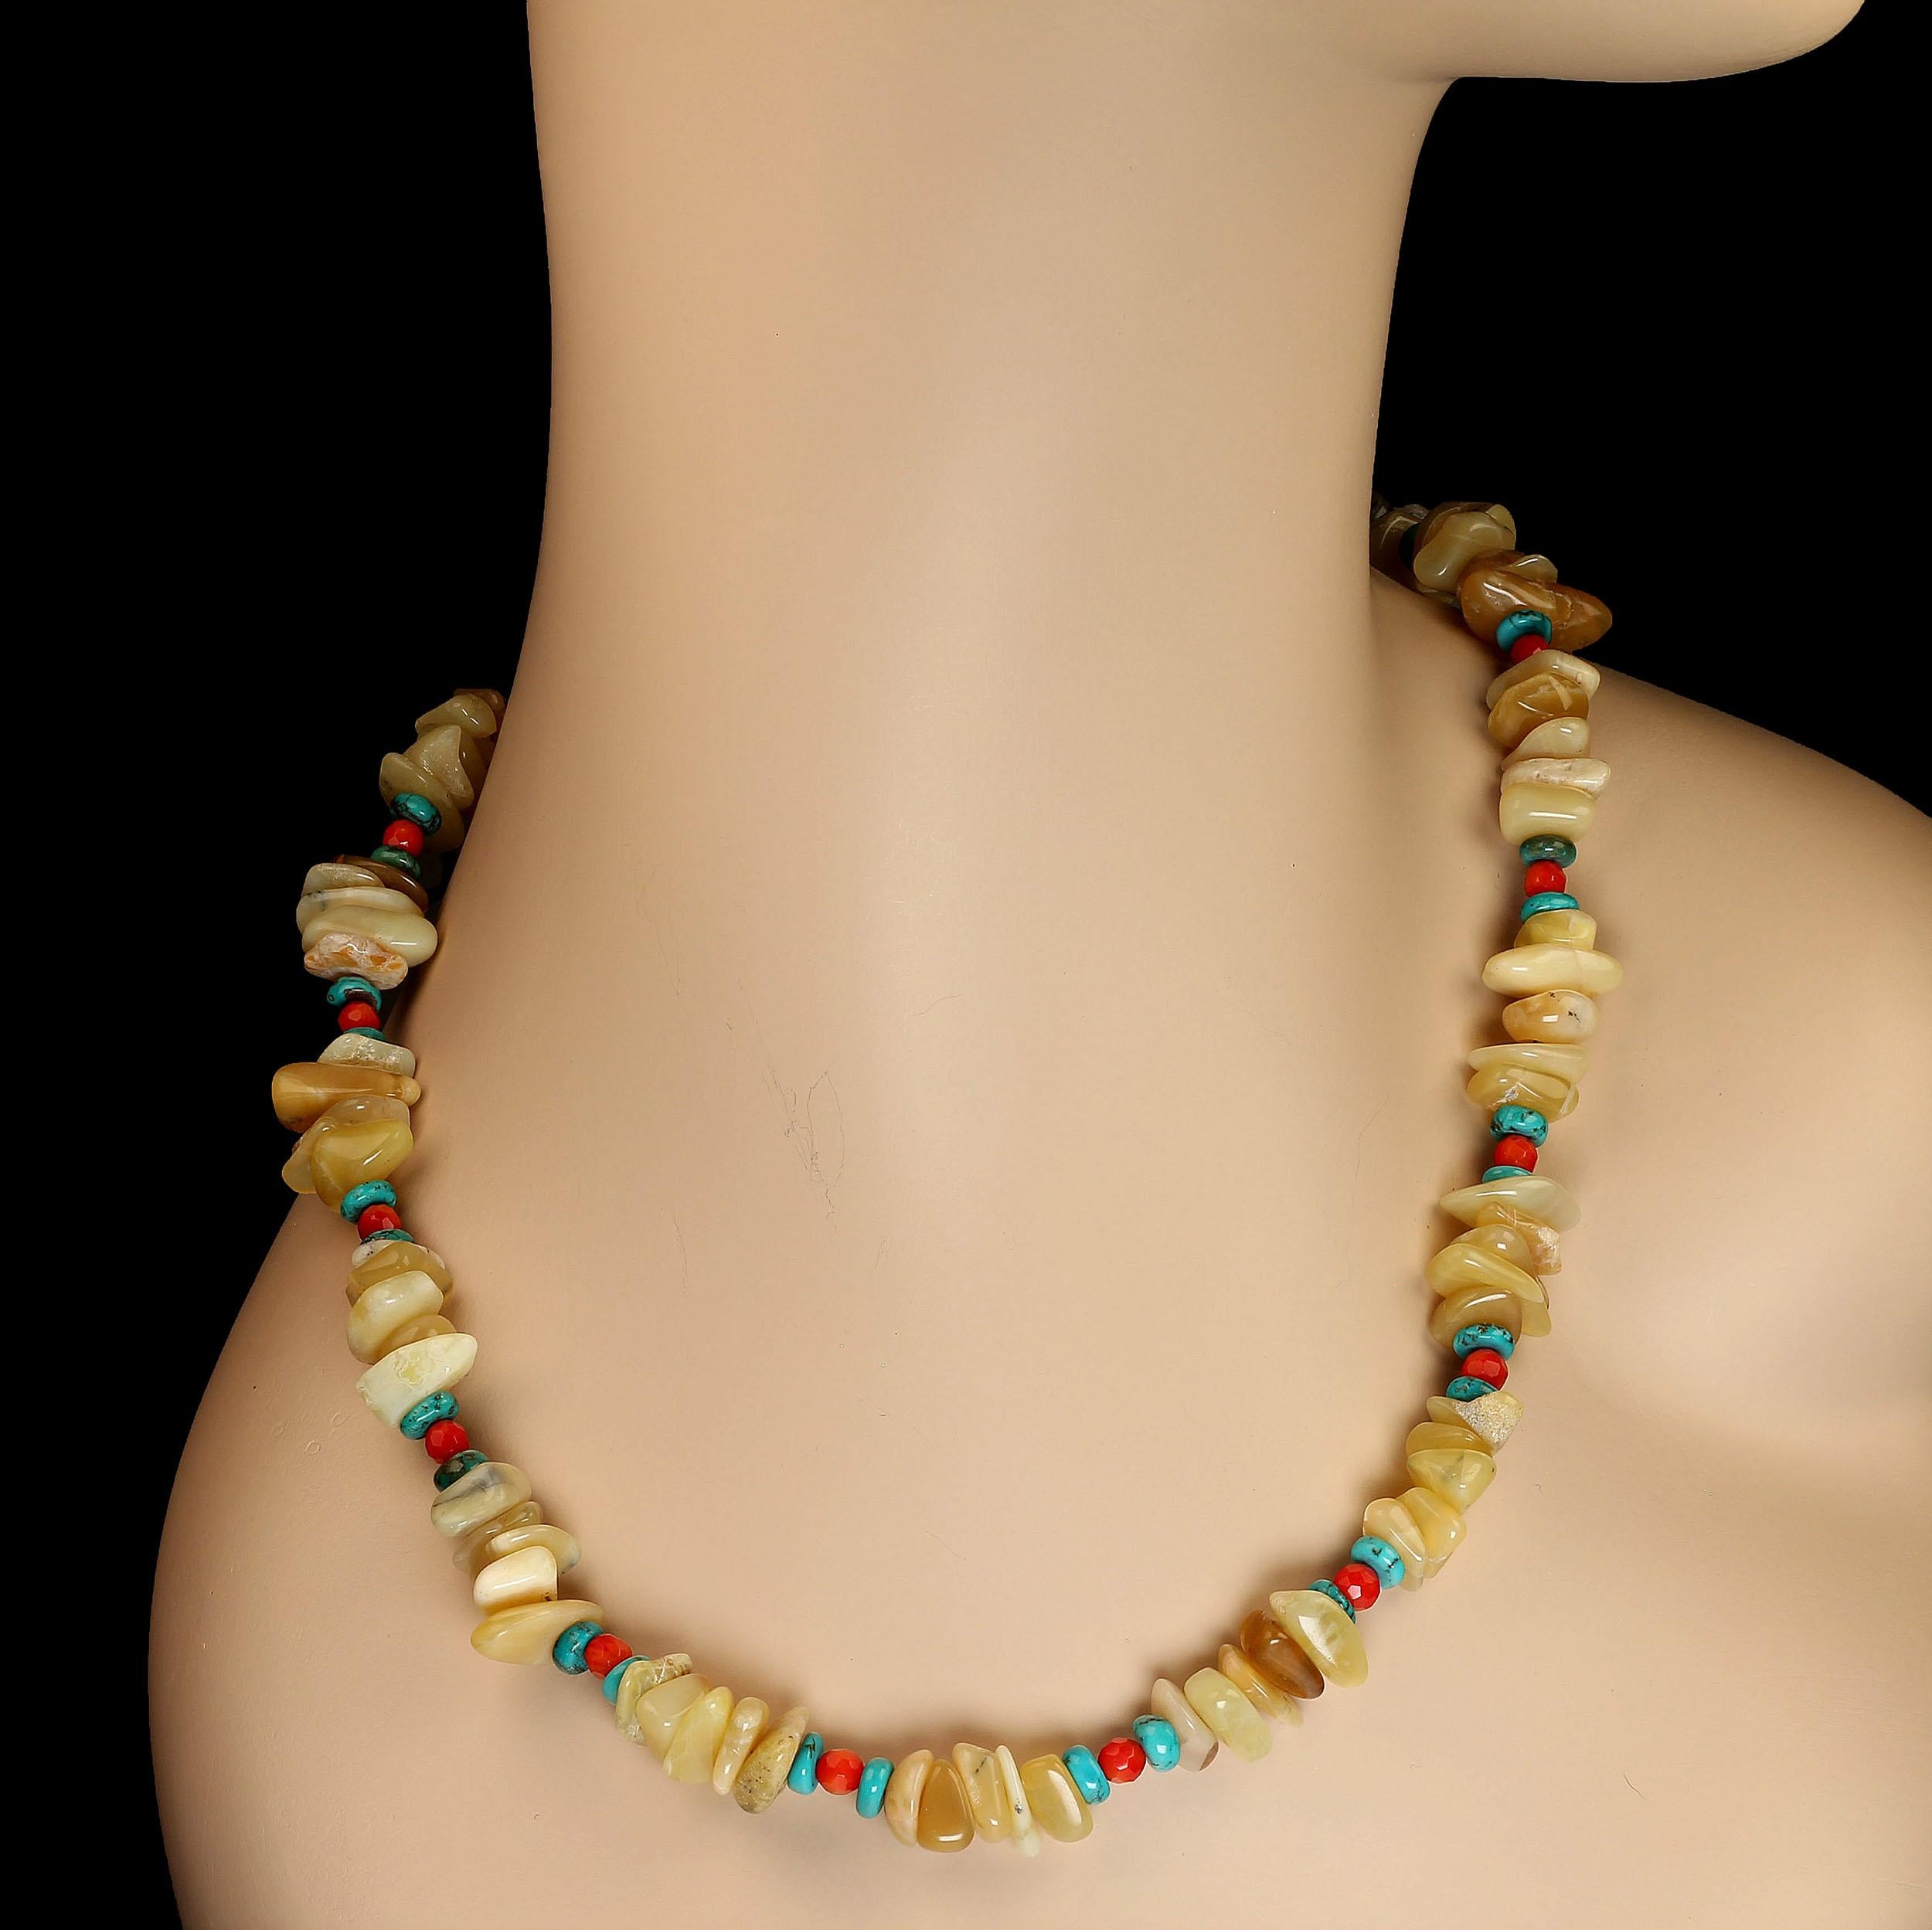 Necklace of highly polished Australian Yellow Opal pebble with southwestern style accents. Be the only person wearing Australian Yellow Opal, this lovely warm color will be enhance whatever you choose to pair it with. The 25 inch length is very